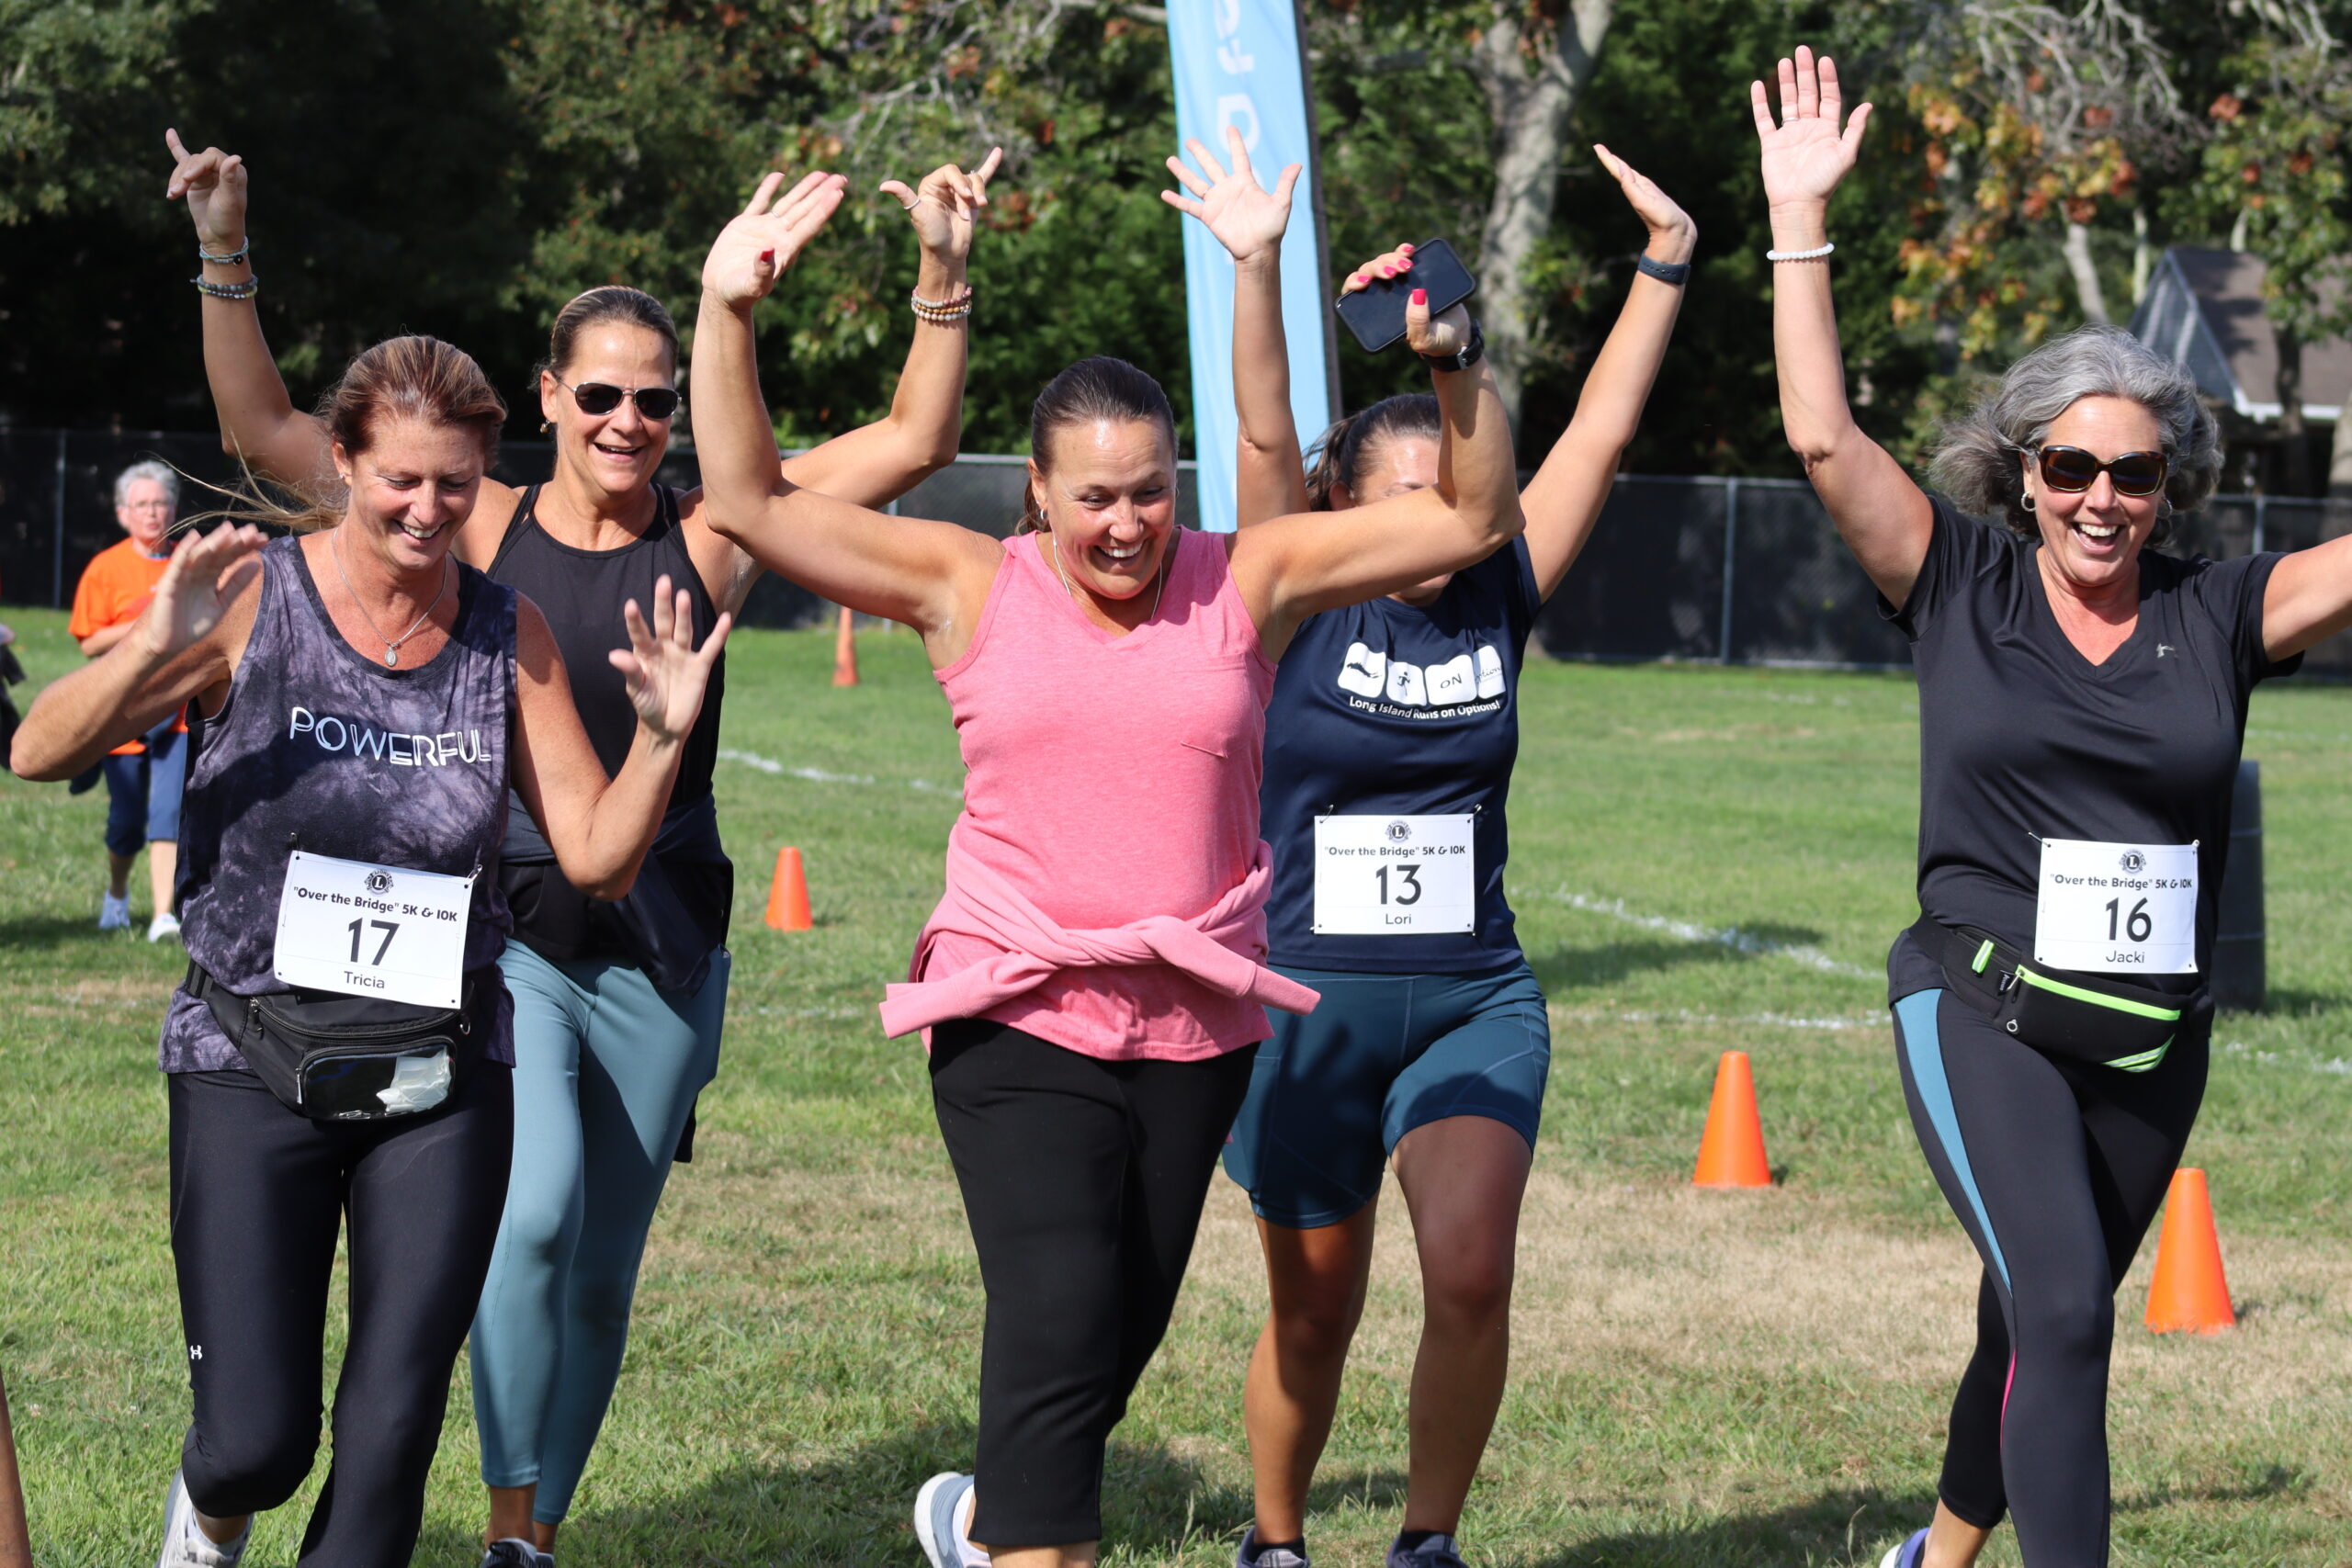 A group of friends raises their hands in triumph after crossing the finish line in the 11th annual Over the Bridge 5K and 10K run in Hampton Bays on Saturday. CAILIN RILEY